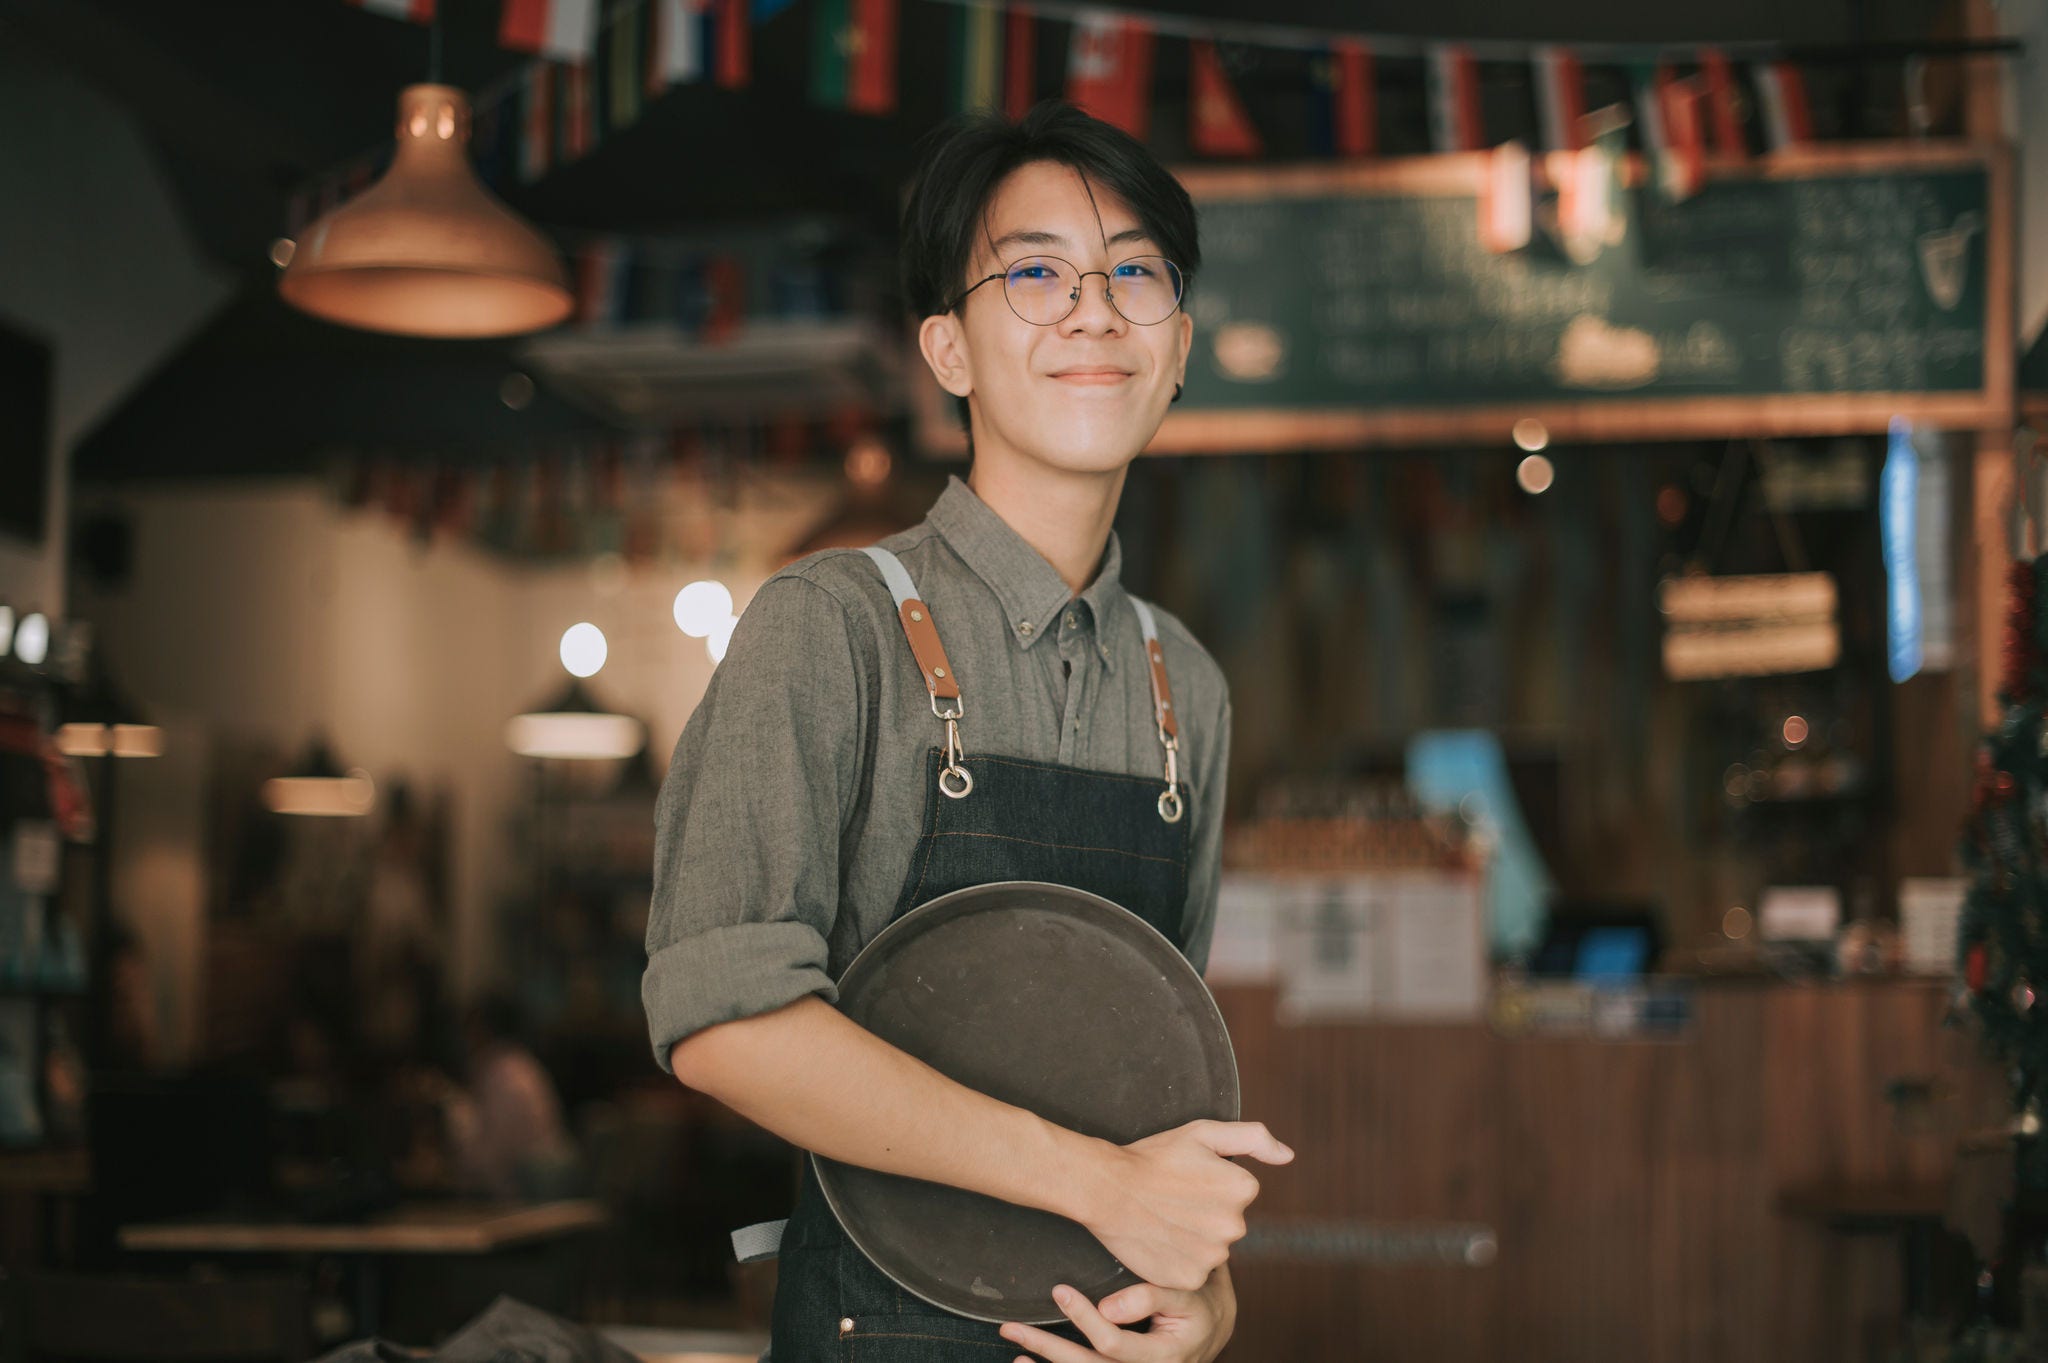 young man working as a barista in a coffee shop holding a serving tray